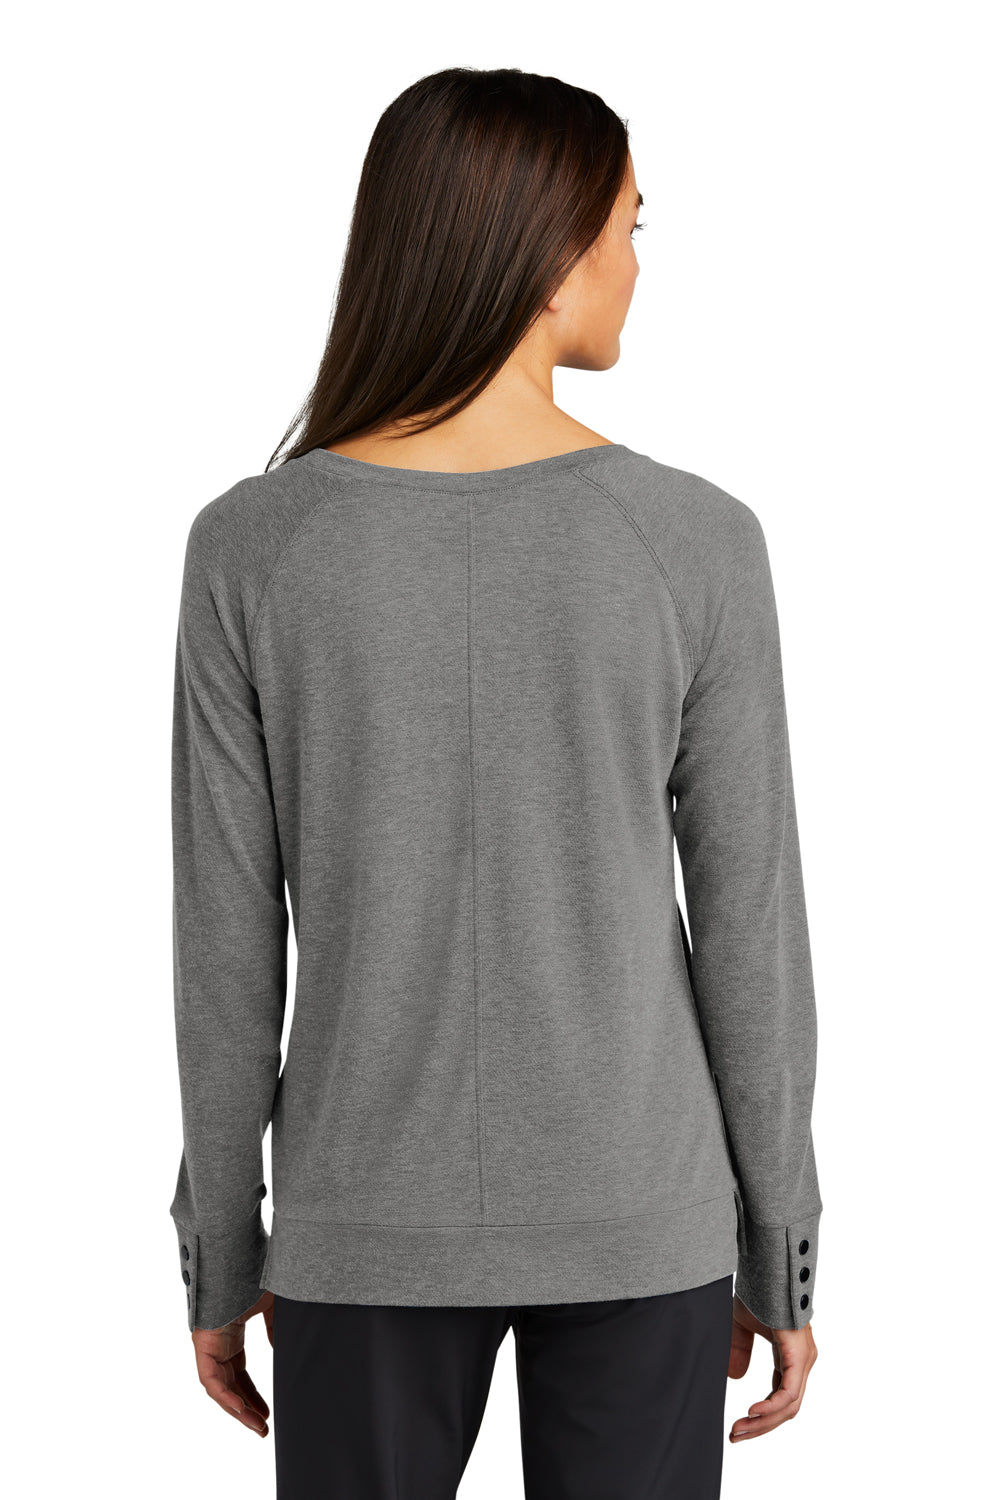 Ogio Womens Command Long Sleeve Scoop Neck T-Shirt Gear Grey Back